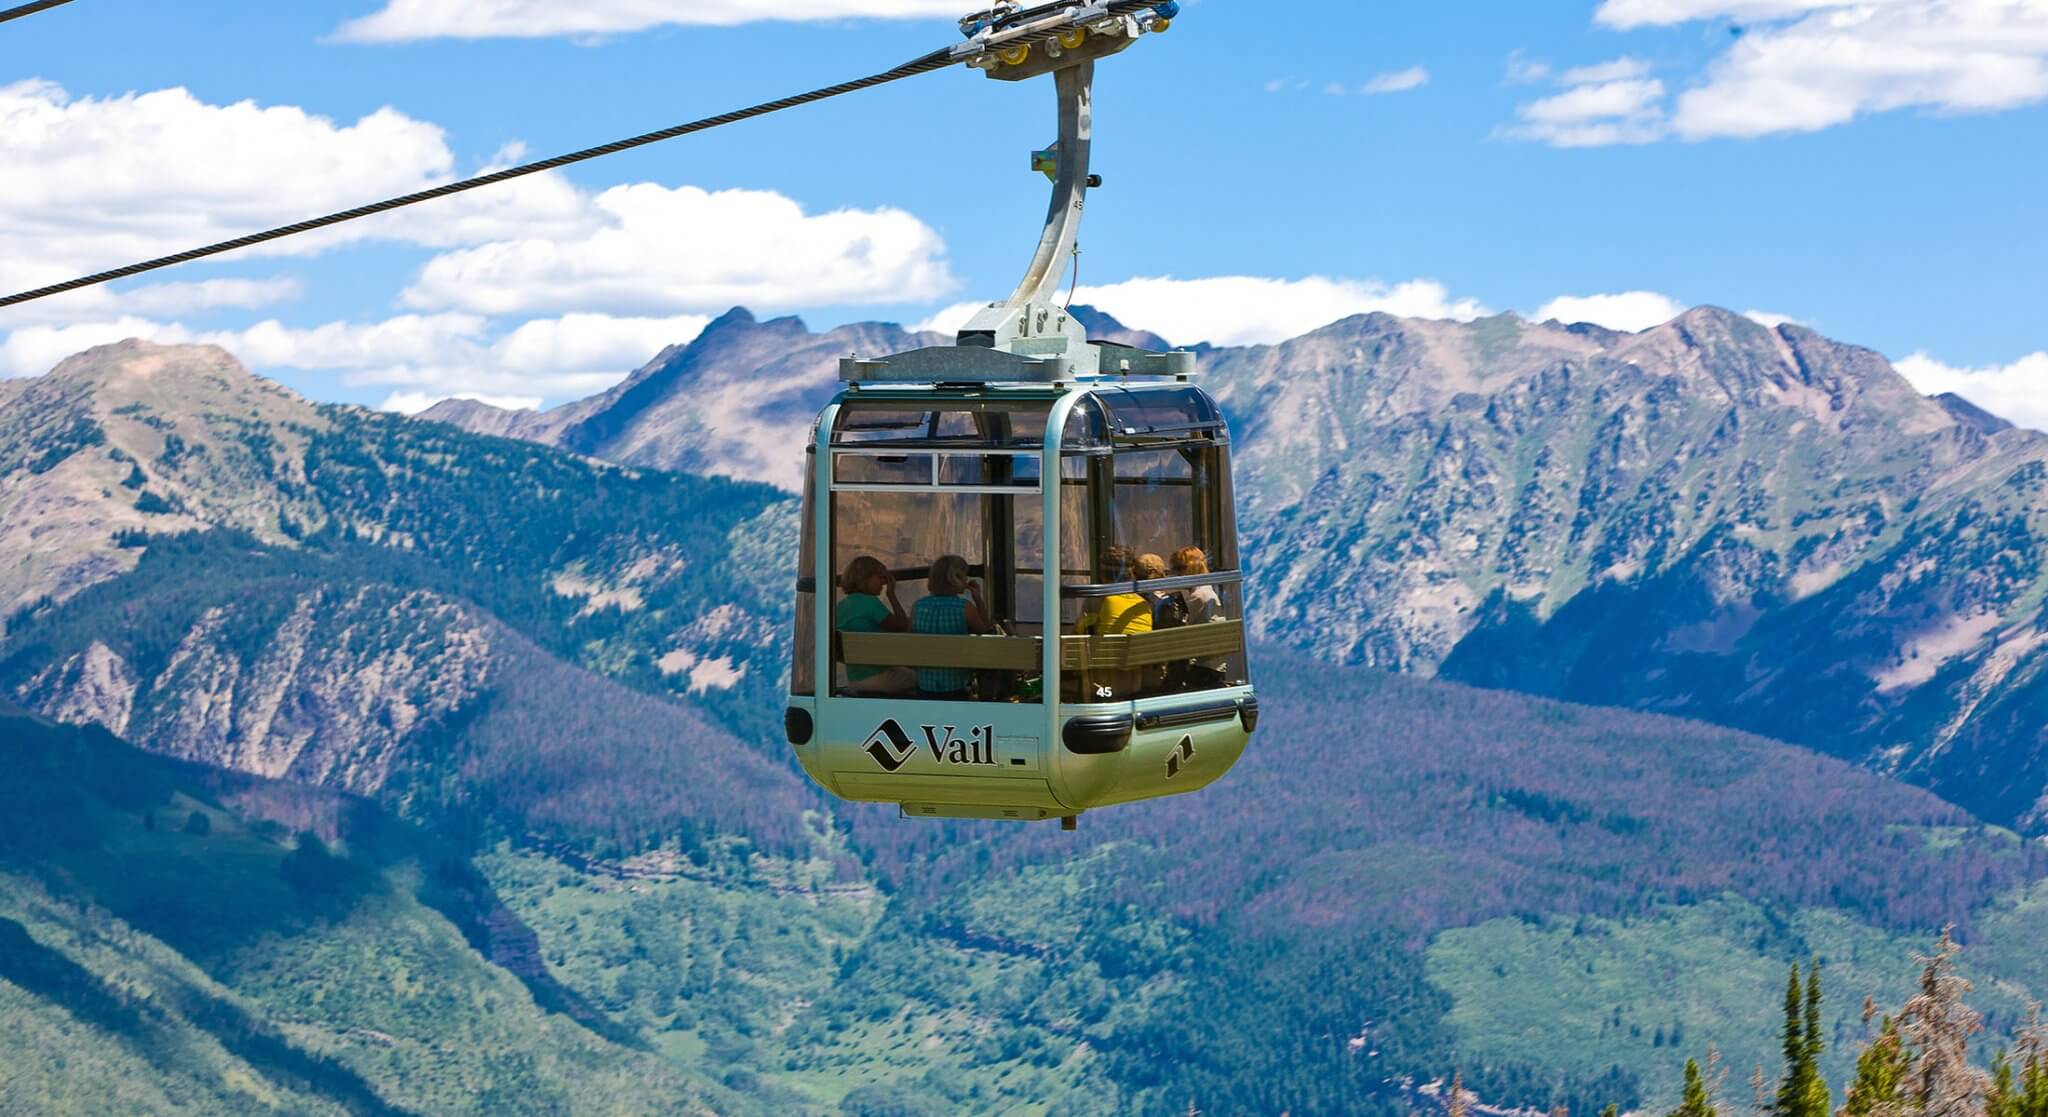 A gondola ride in the mountains with fishing in Vail.